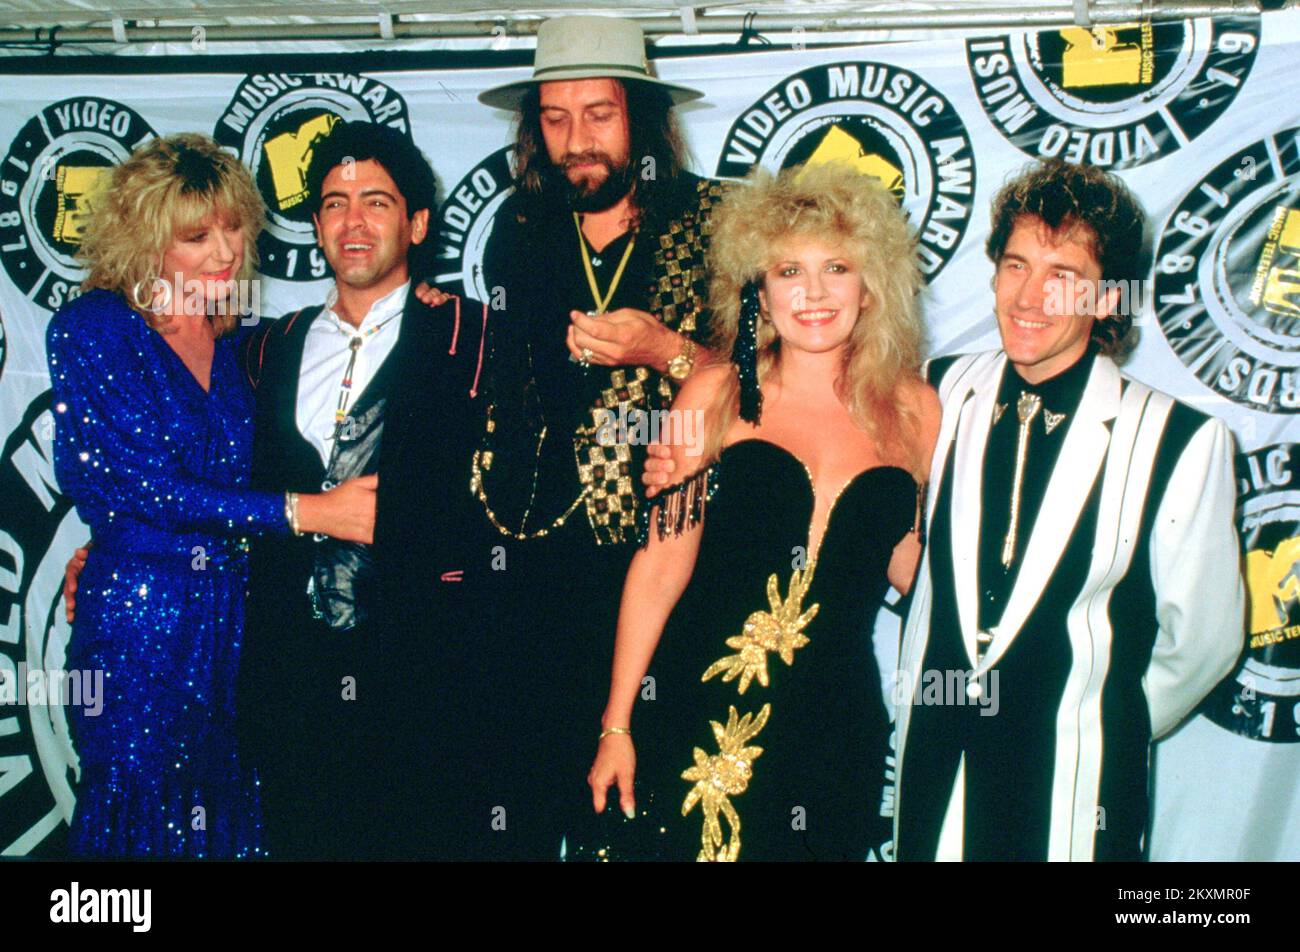 **FILE PHOTO** Christine McVie of Fleetwood Mac Has Passed Away at 79. Fleetwood Mac photographed at the MTV Video Music Awards in 1987. Credit: Scott Weiner/MediaPunch Stock Photo